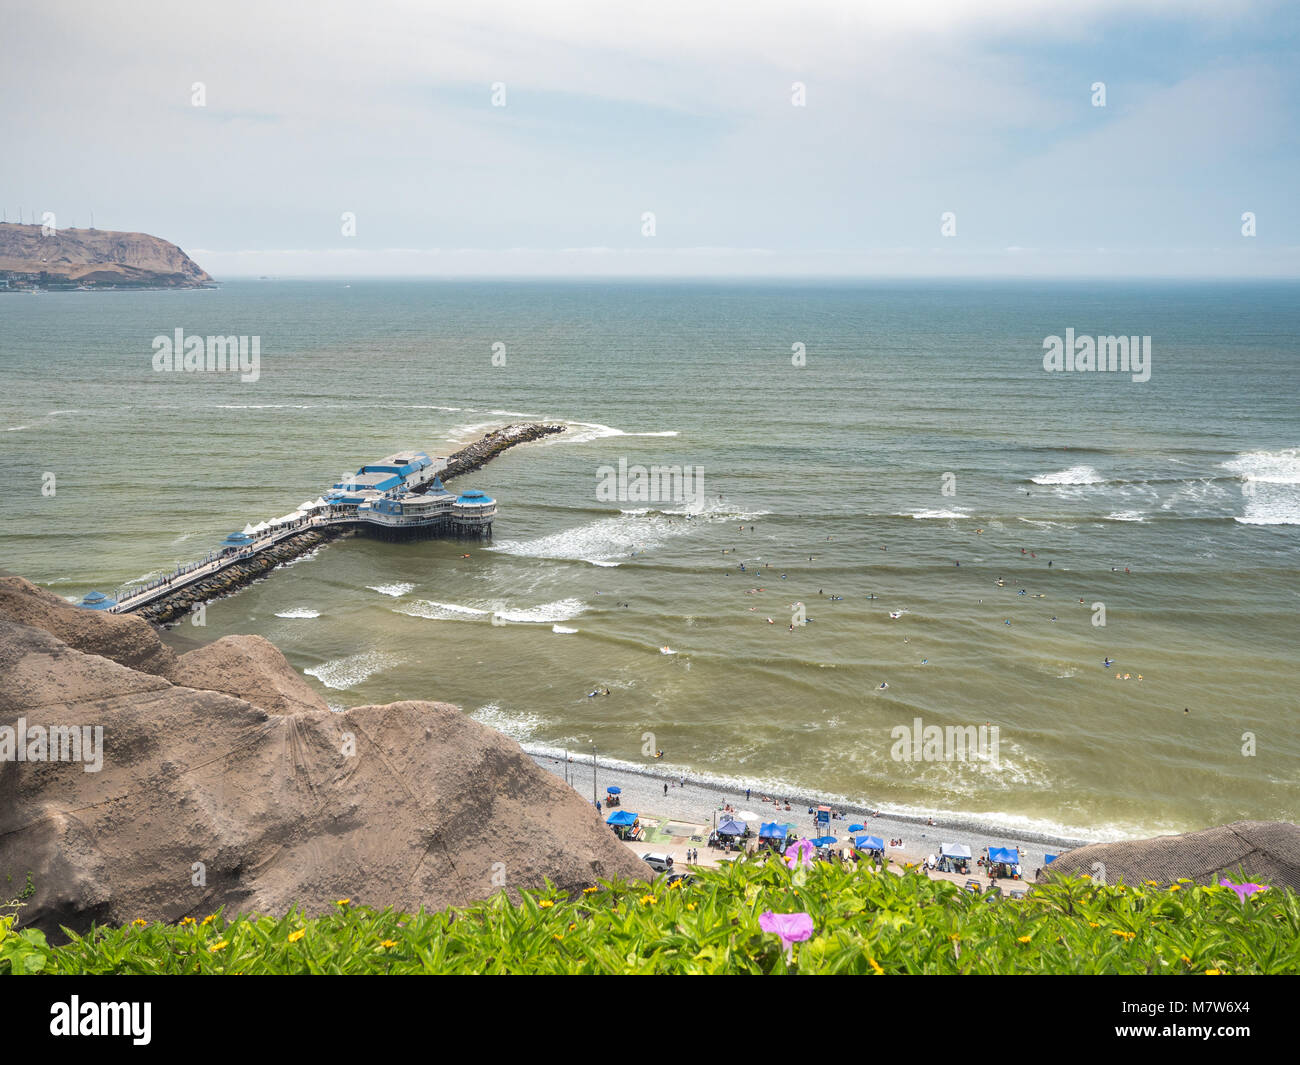 View of the Lima beaches and the surfers in the water Stock Photo